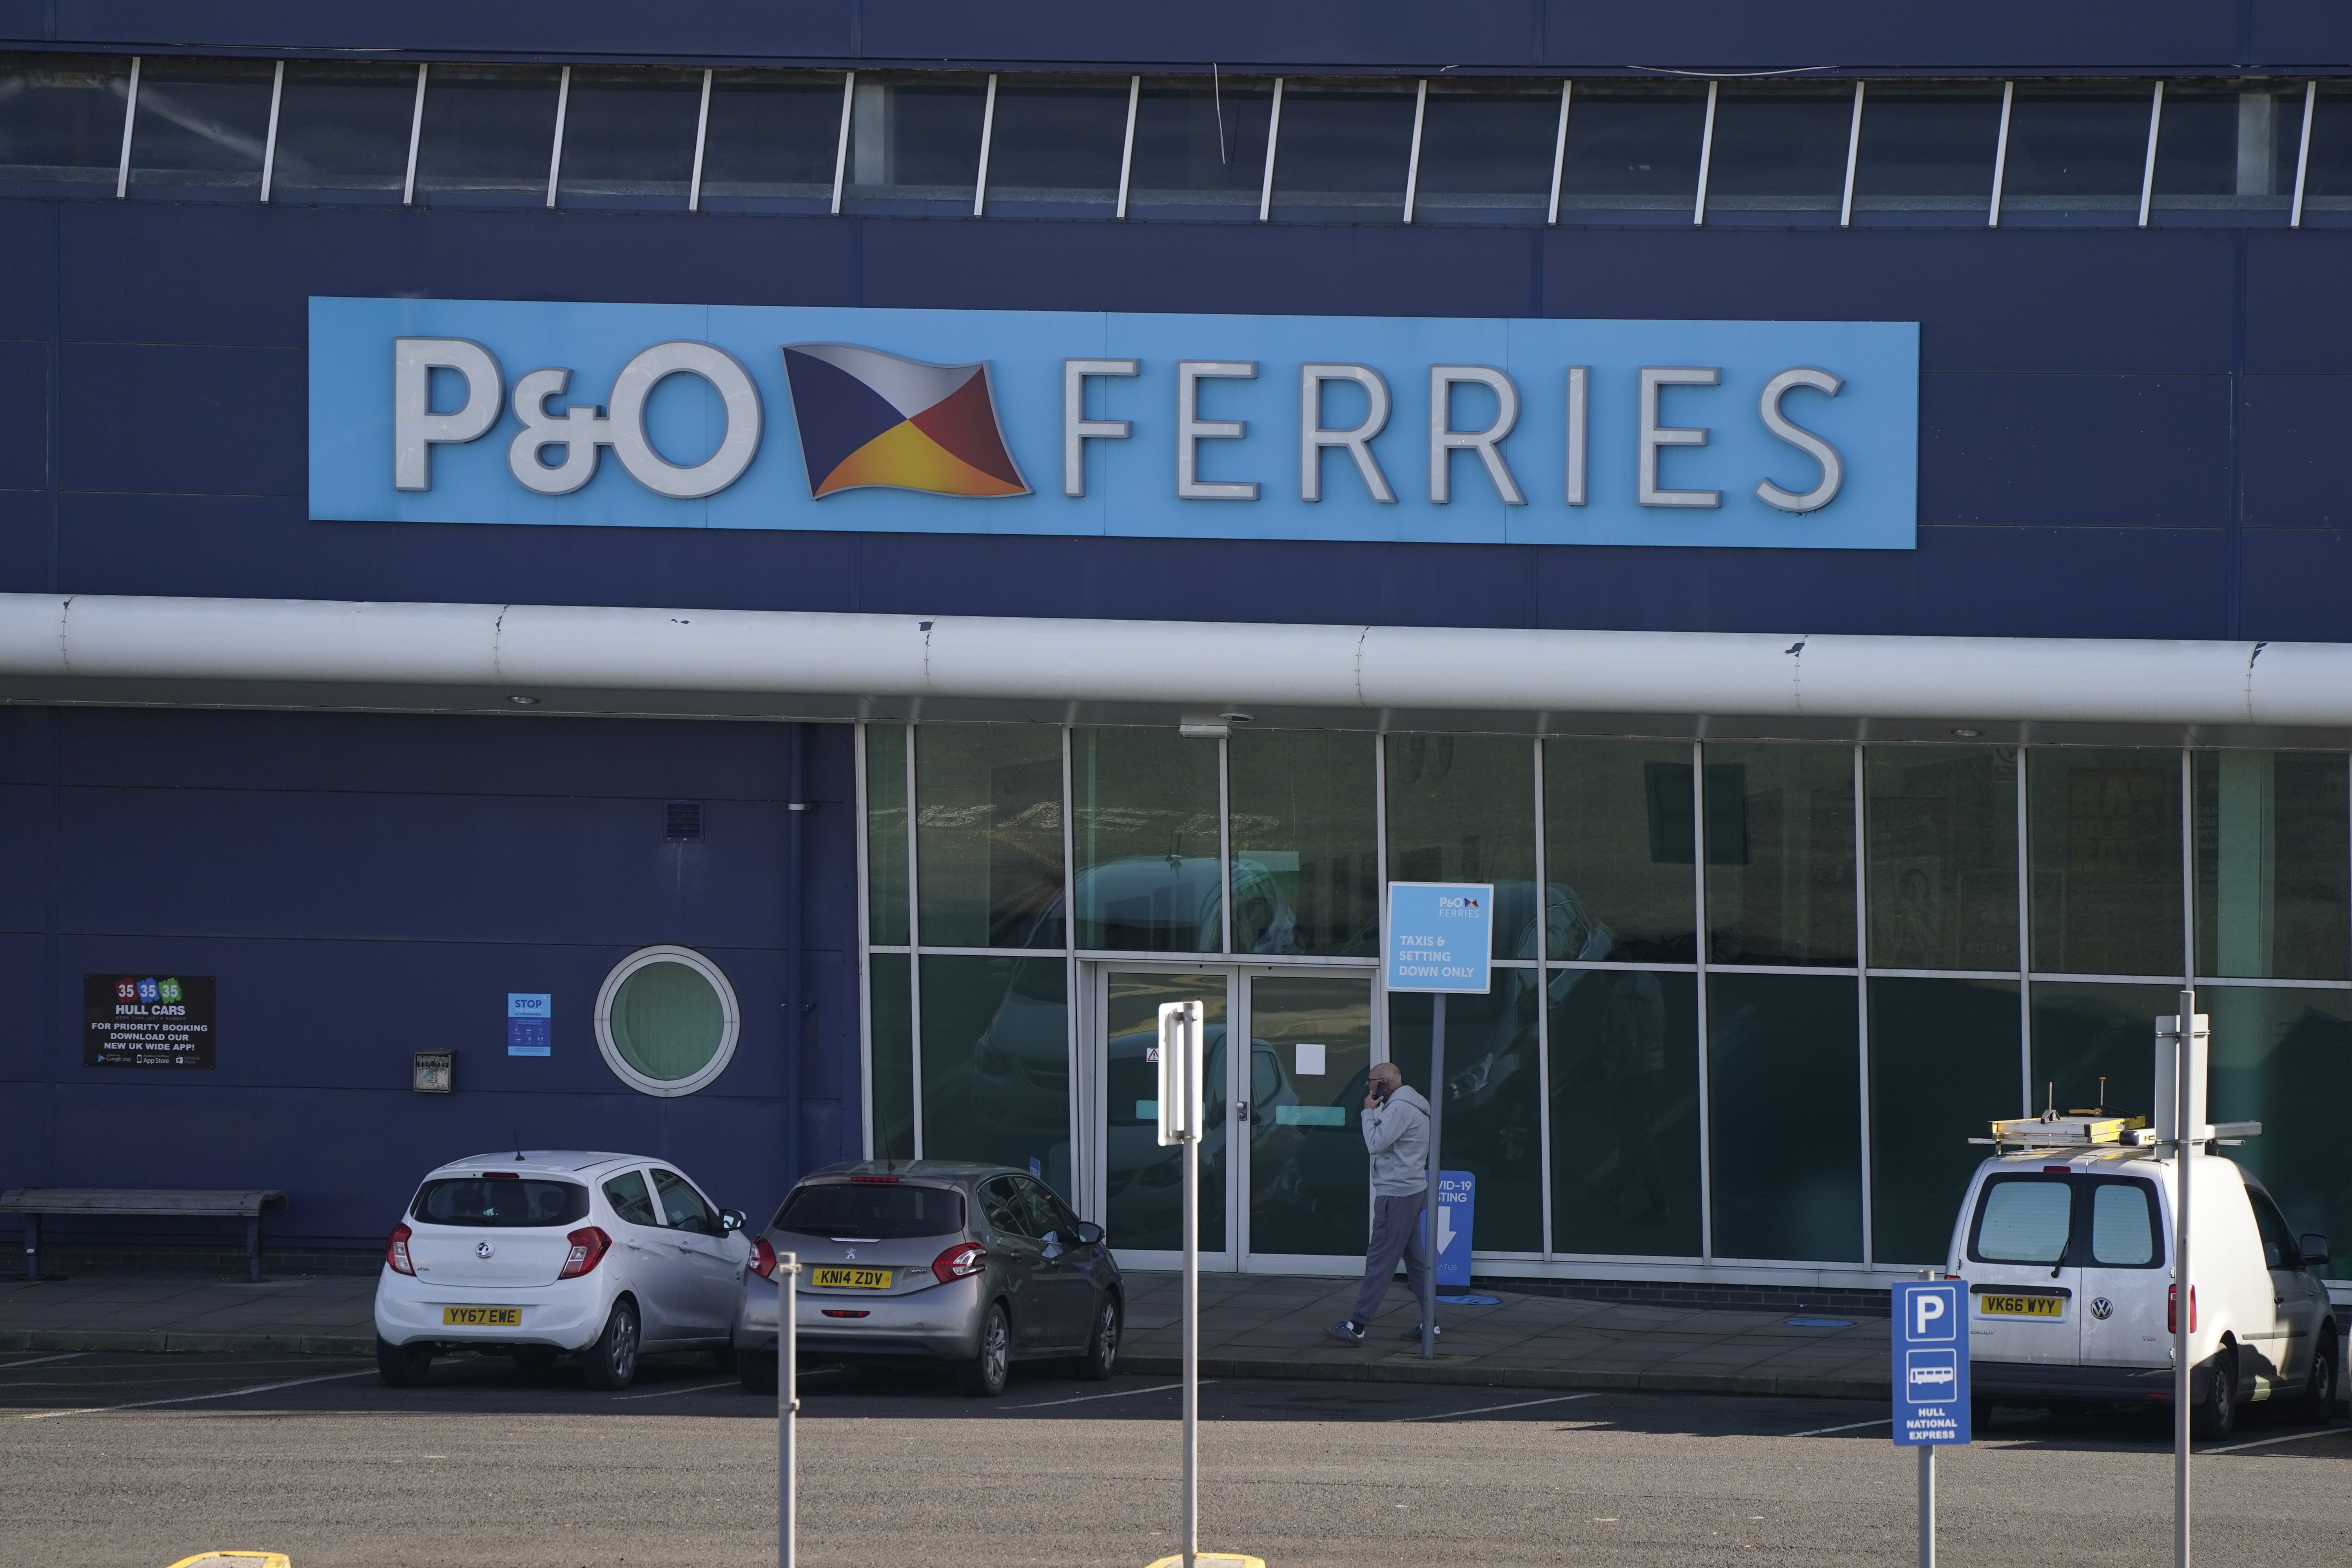 P&O Ferries carried out a mass sacking of 800 staff and after they were told of their redundancies they were forced off the vessels